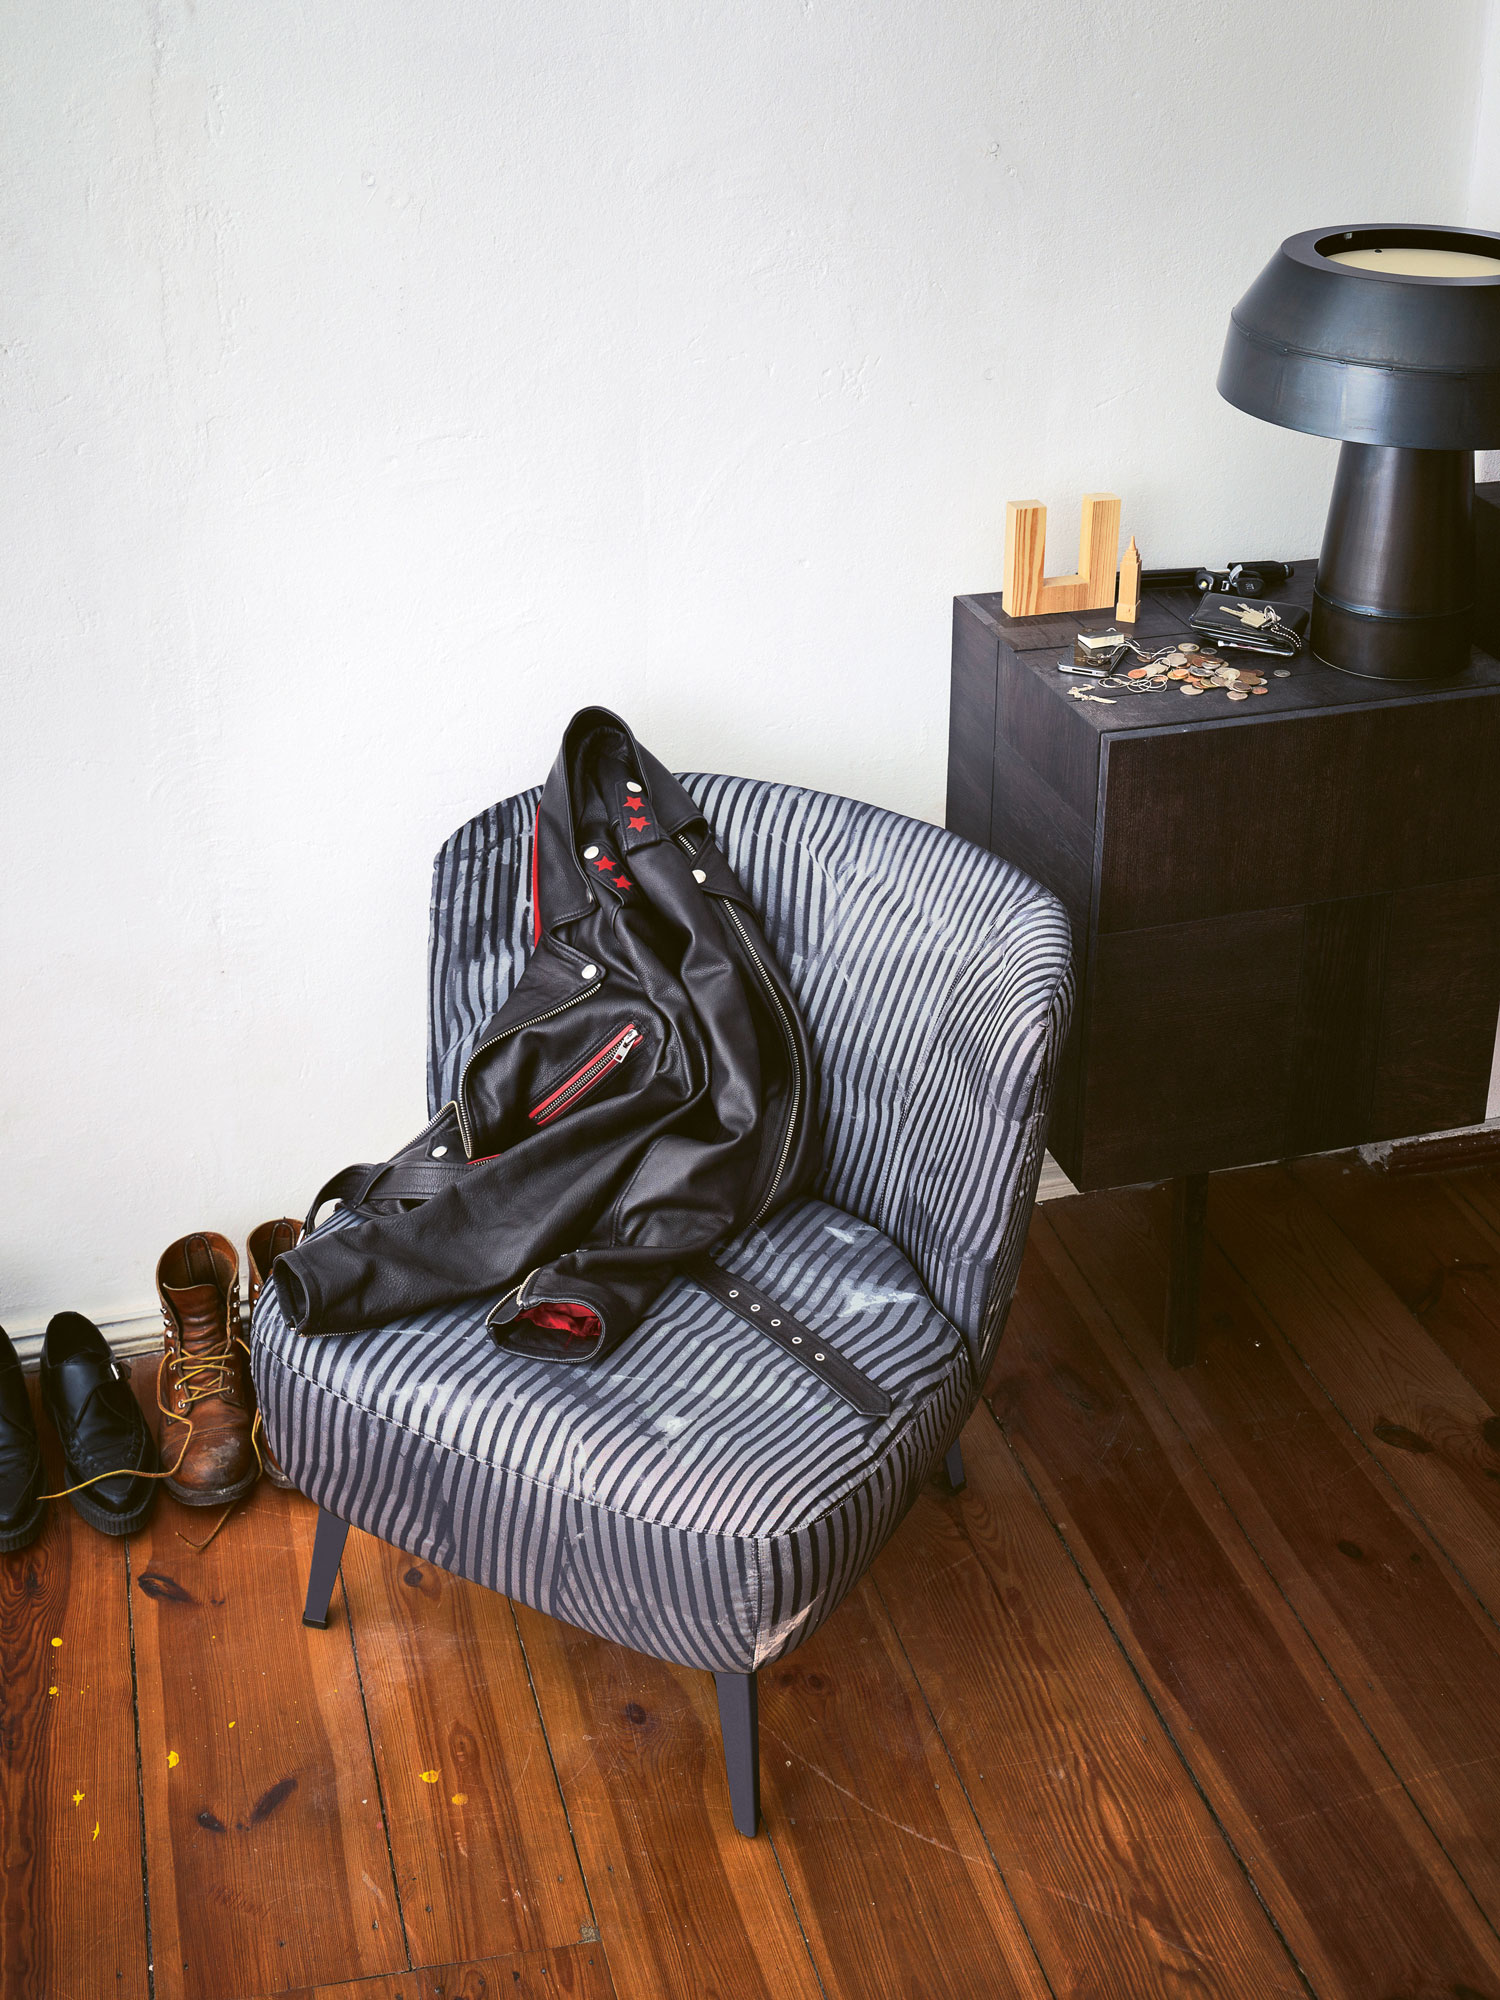 Diesel - GIMME SHELTER - FAUTEUIL,  - Image 1